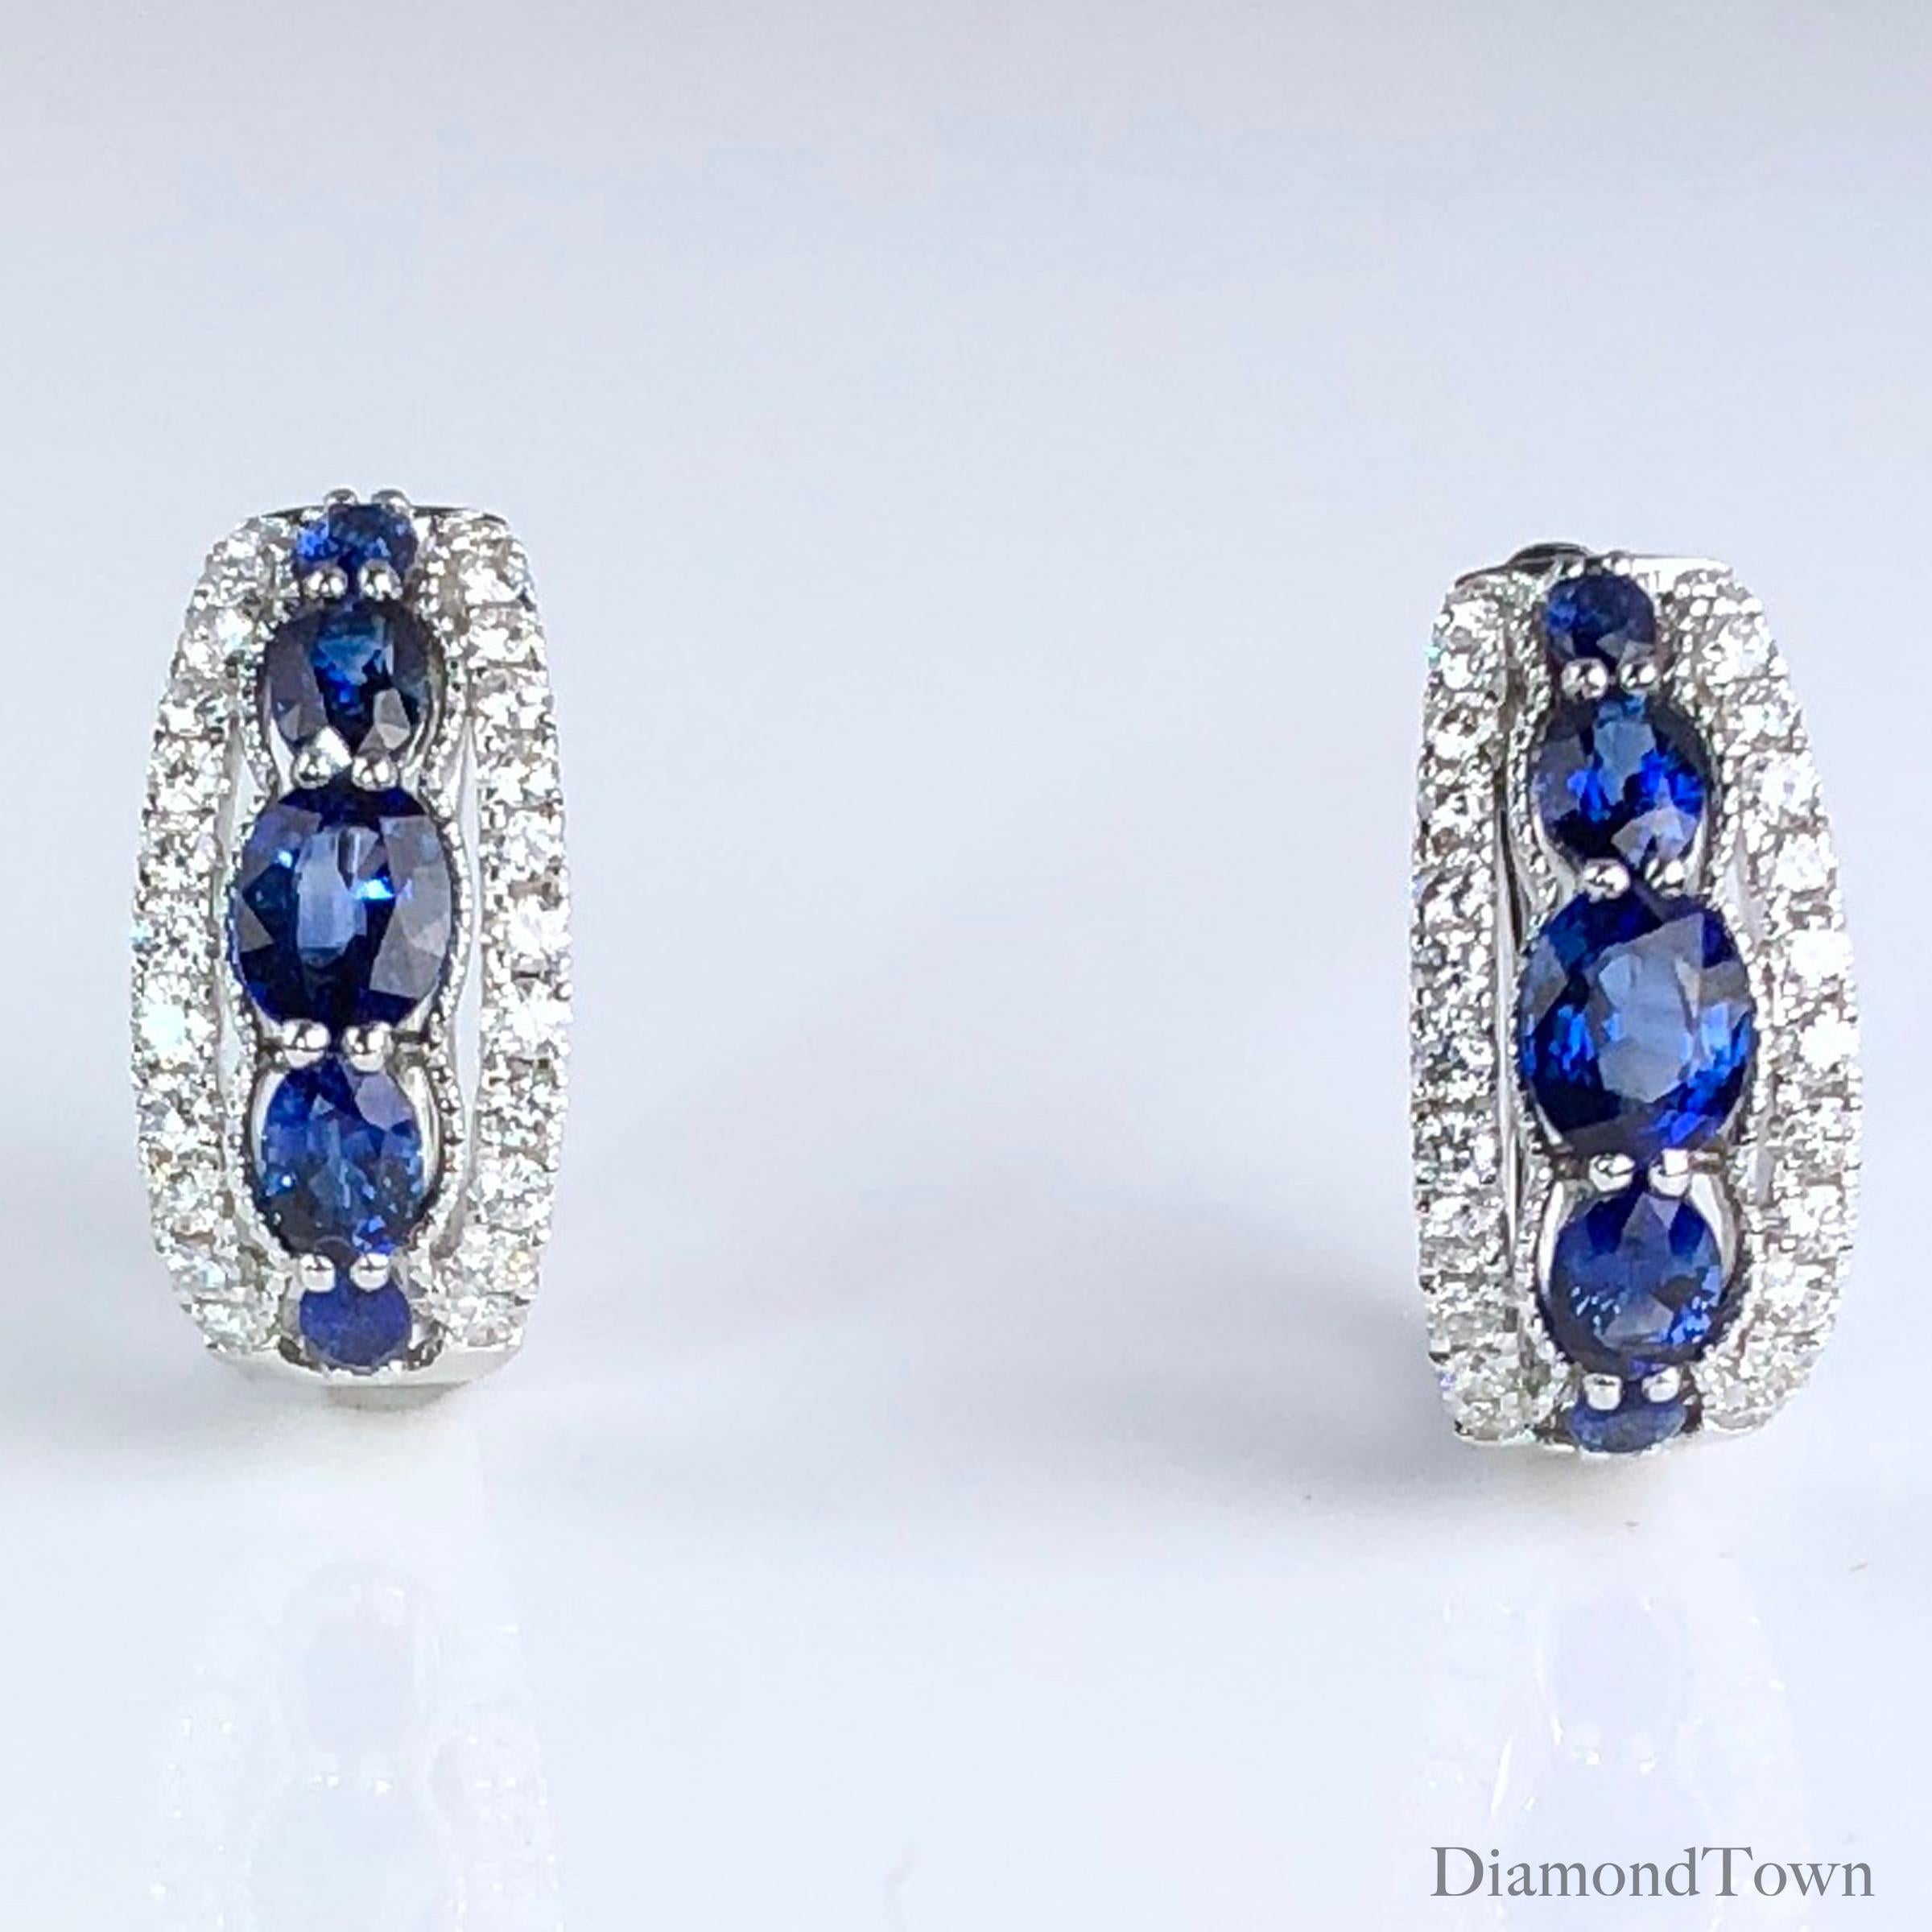 These earrings feature 5 graduated oval cut sapphires each (total weight 2 earrings 1.94 carats), wrapped on both sides with white diamonds (total diamond weight 0.54 carats). The earrings close securely by lever-back, and are set in 18k white